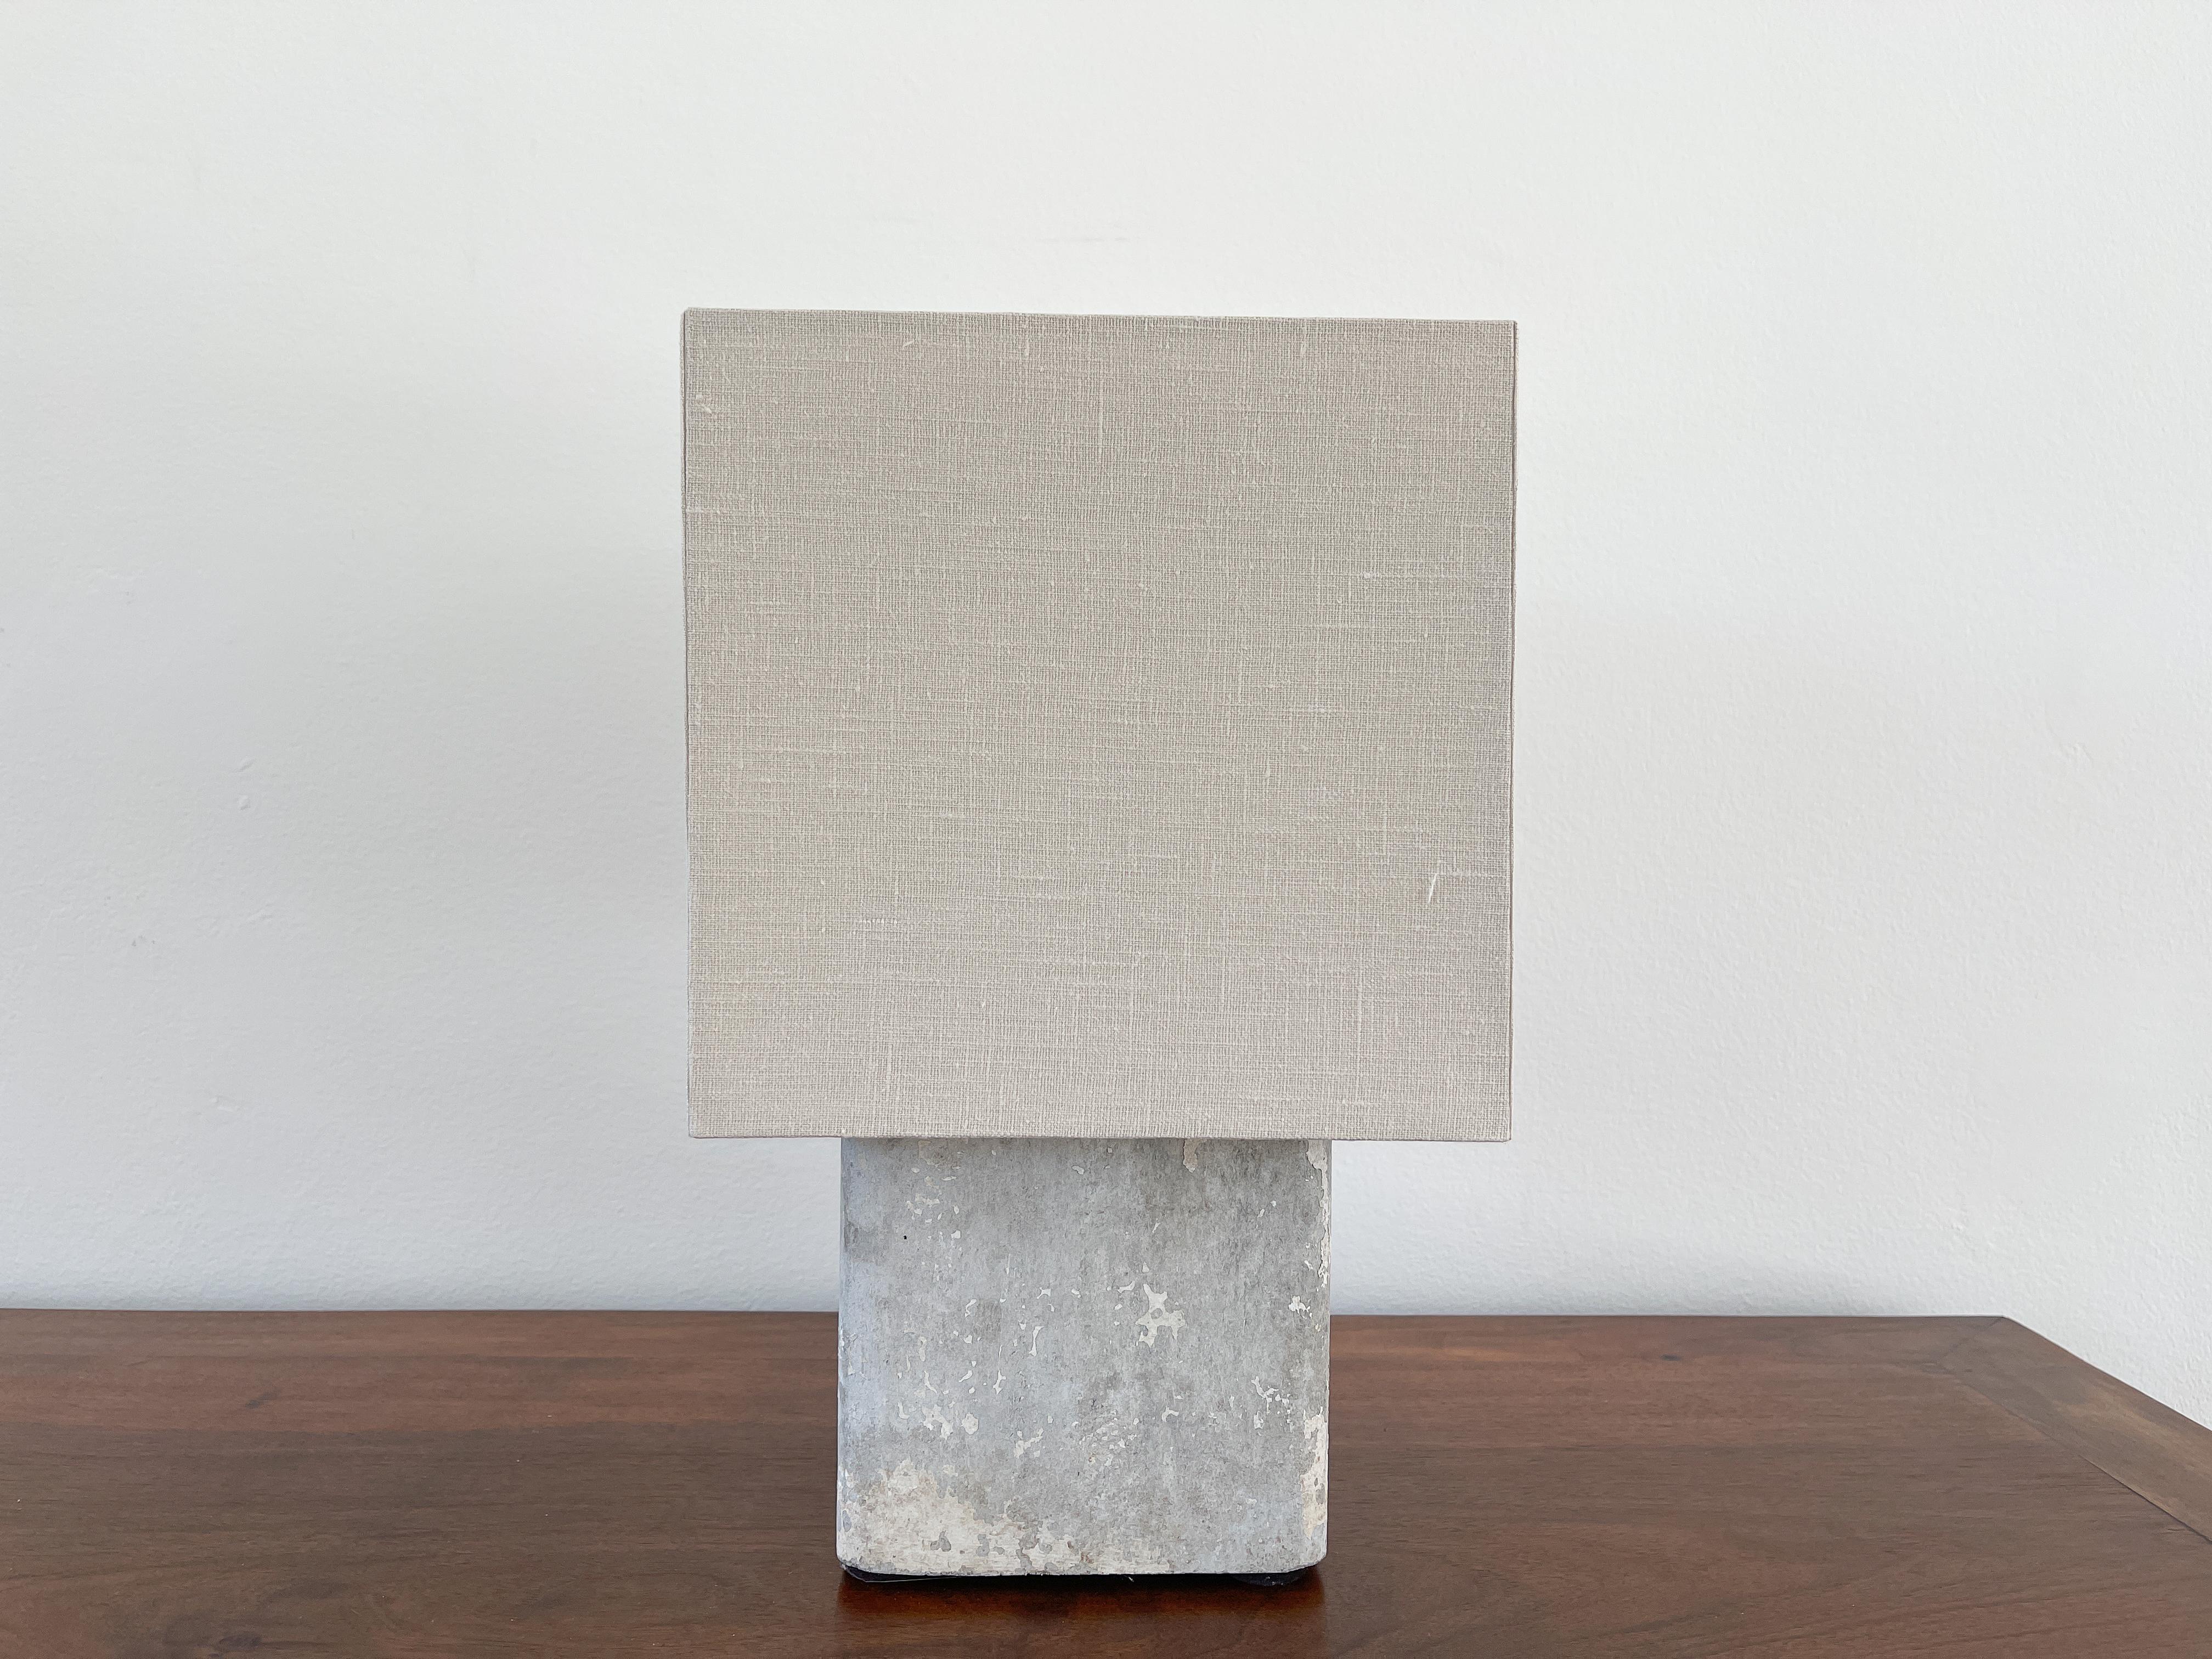 Petite Willy Guhl concrete table lamp with new linen shade 
Priced individually.

Measures : H - 14.75